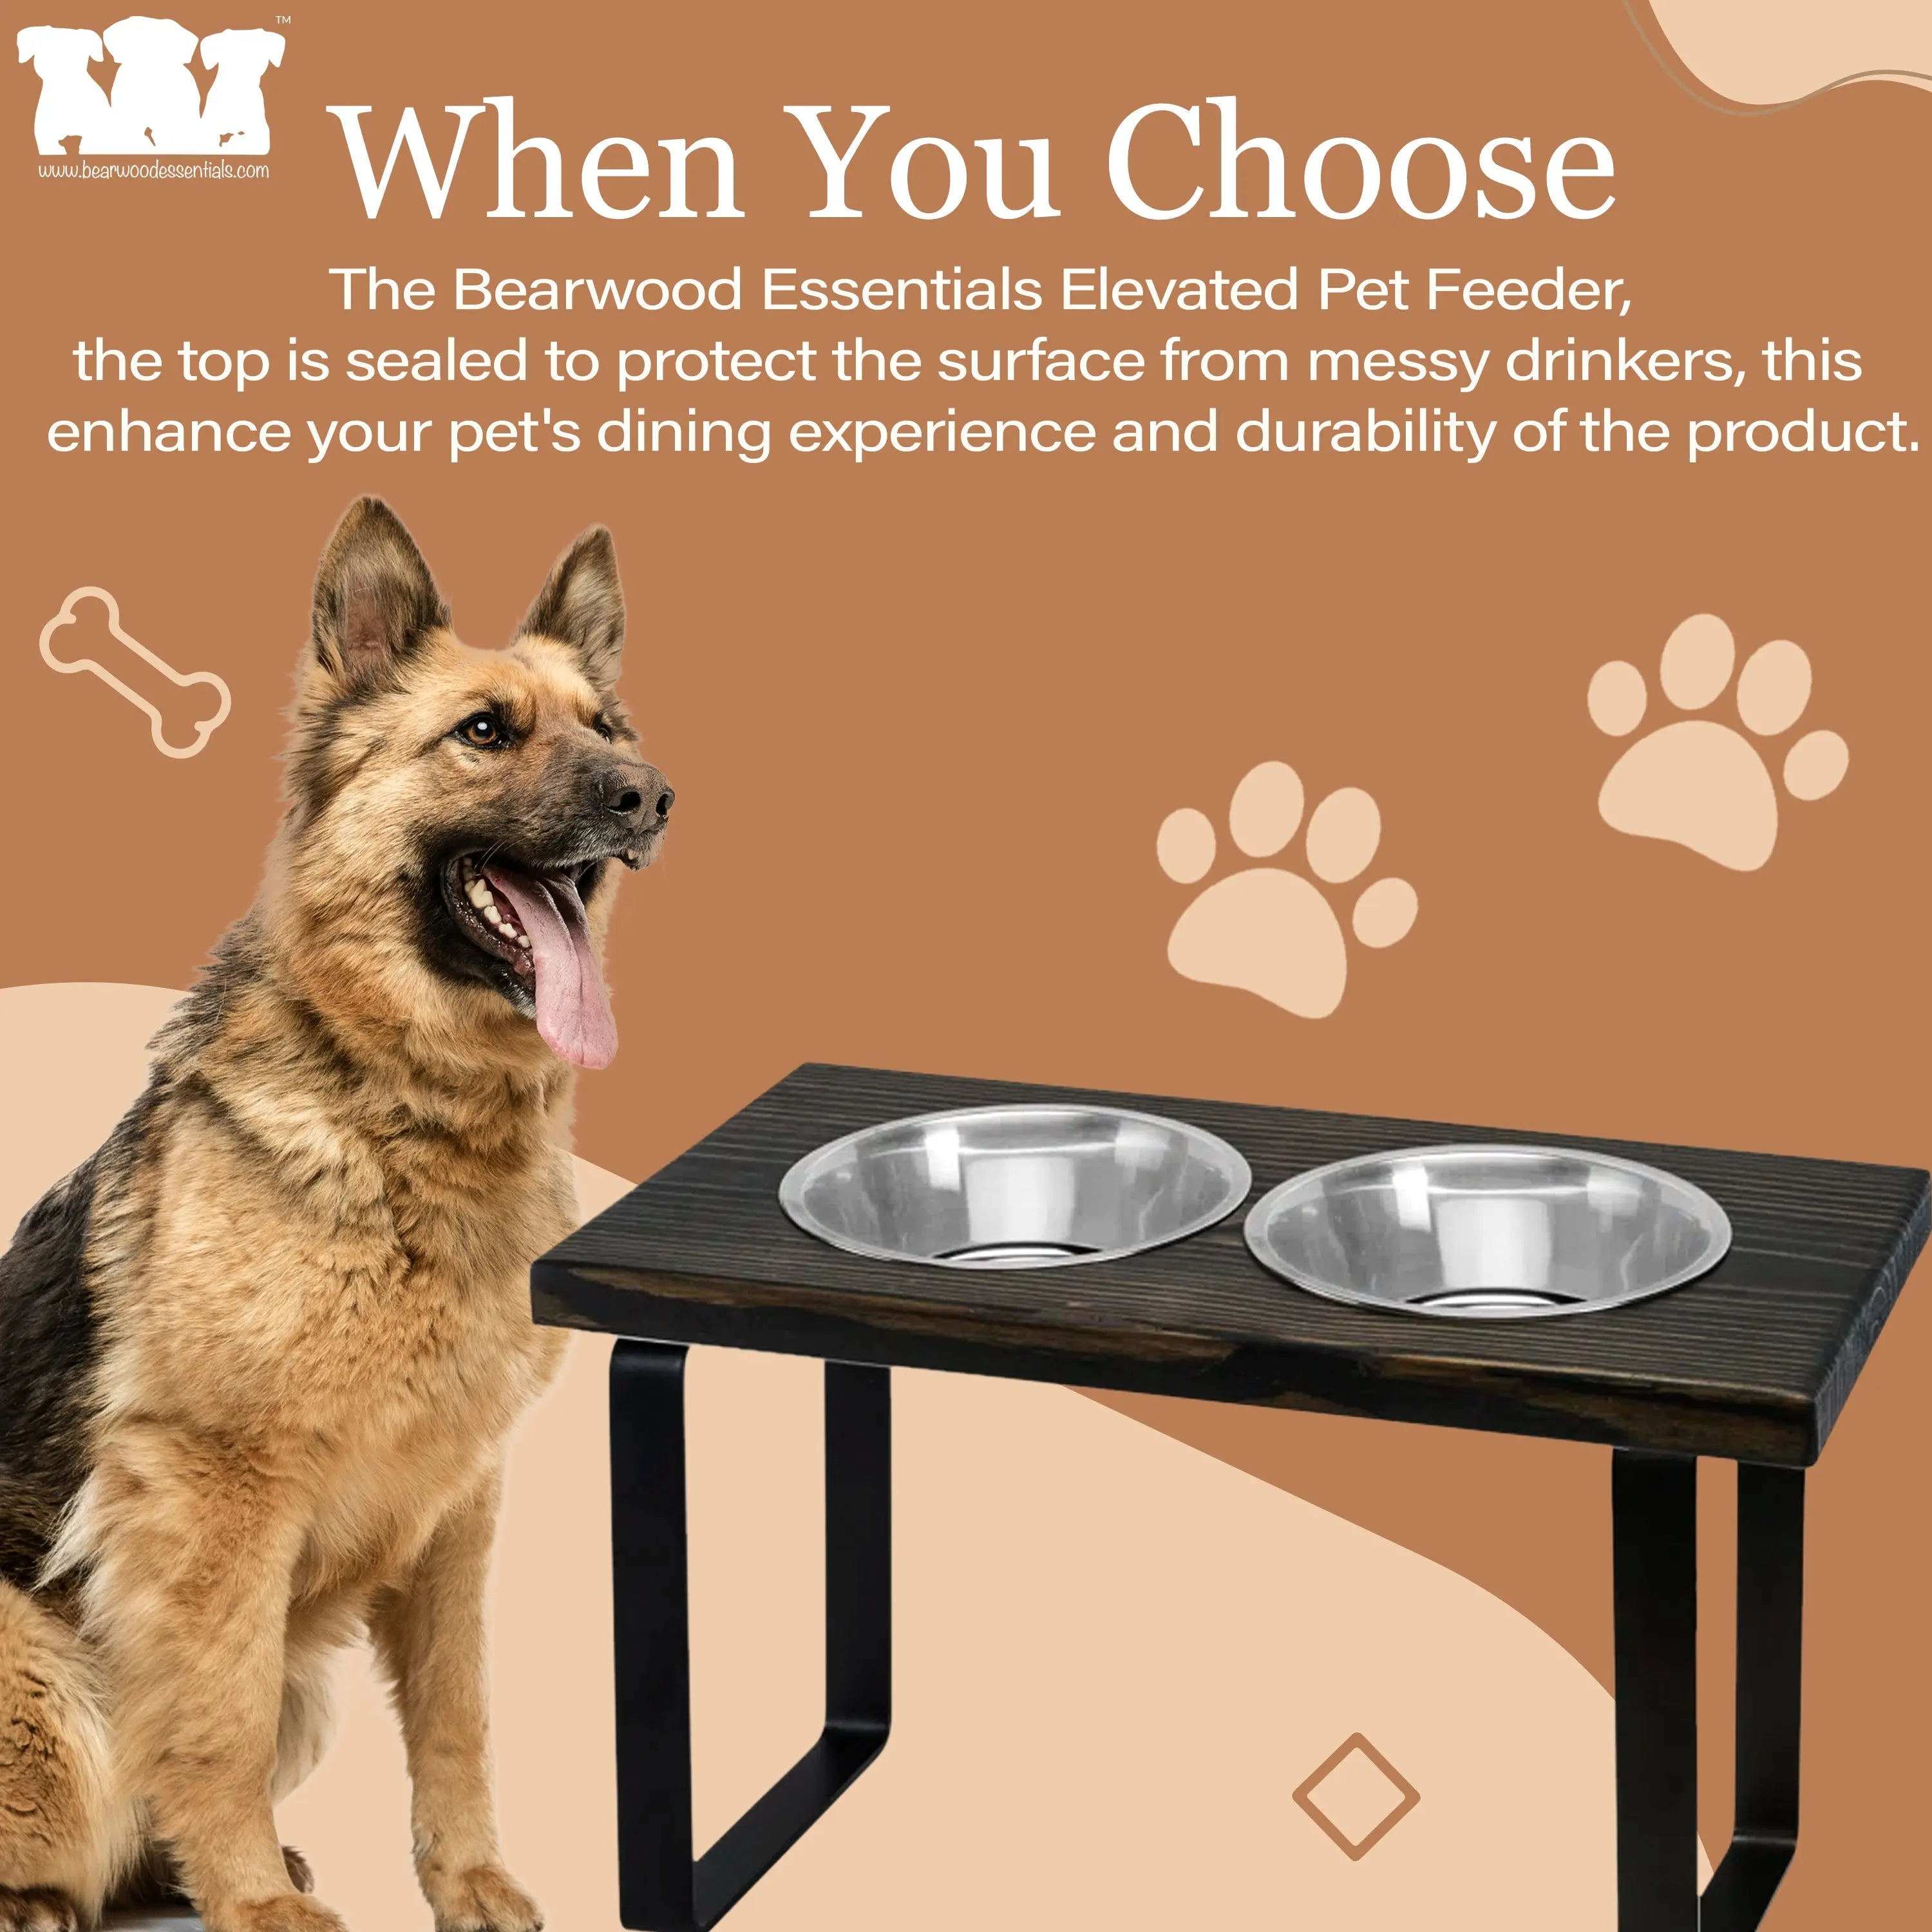 http://bearwoodessentials.com/cdn/shop/files/Metal-dog-bowl-feeder.-Handmade-in-two-sizes-to-fit-medium-or-large-size-dog.-BearwoodEssentials-Elevated-Pet-Feeders-117134259.jpg?v=1698665595